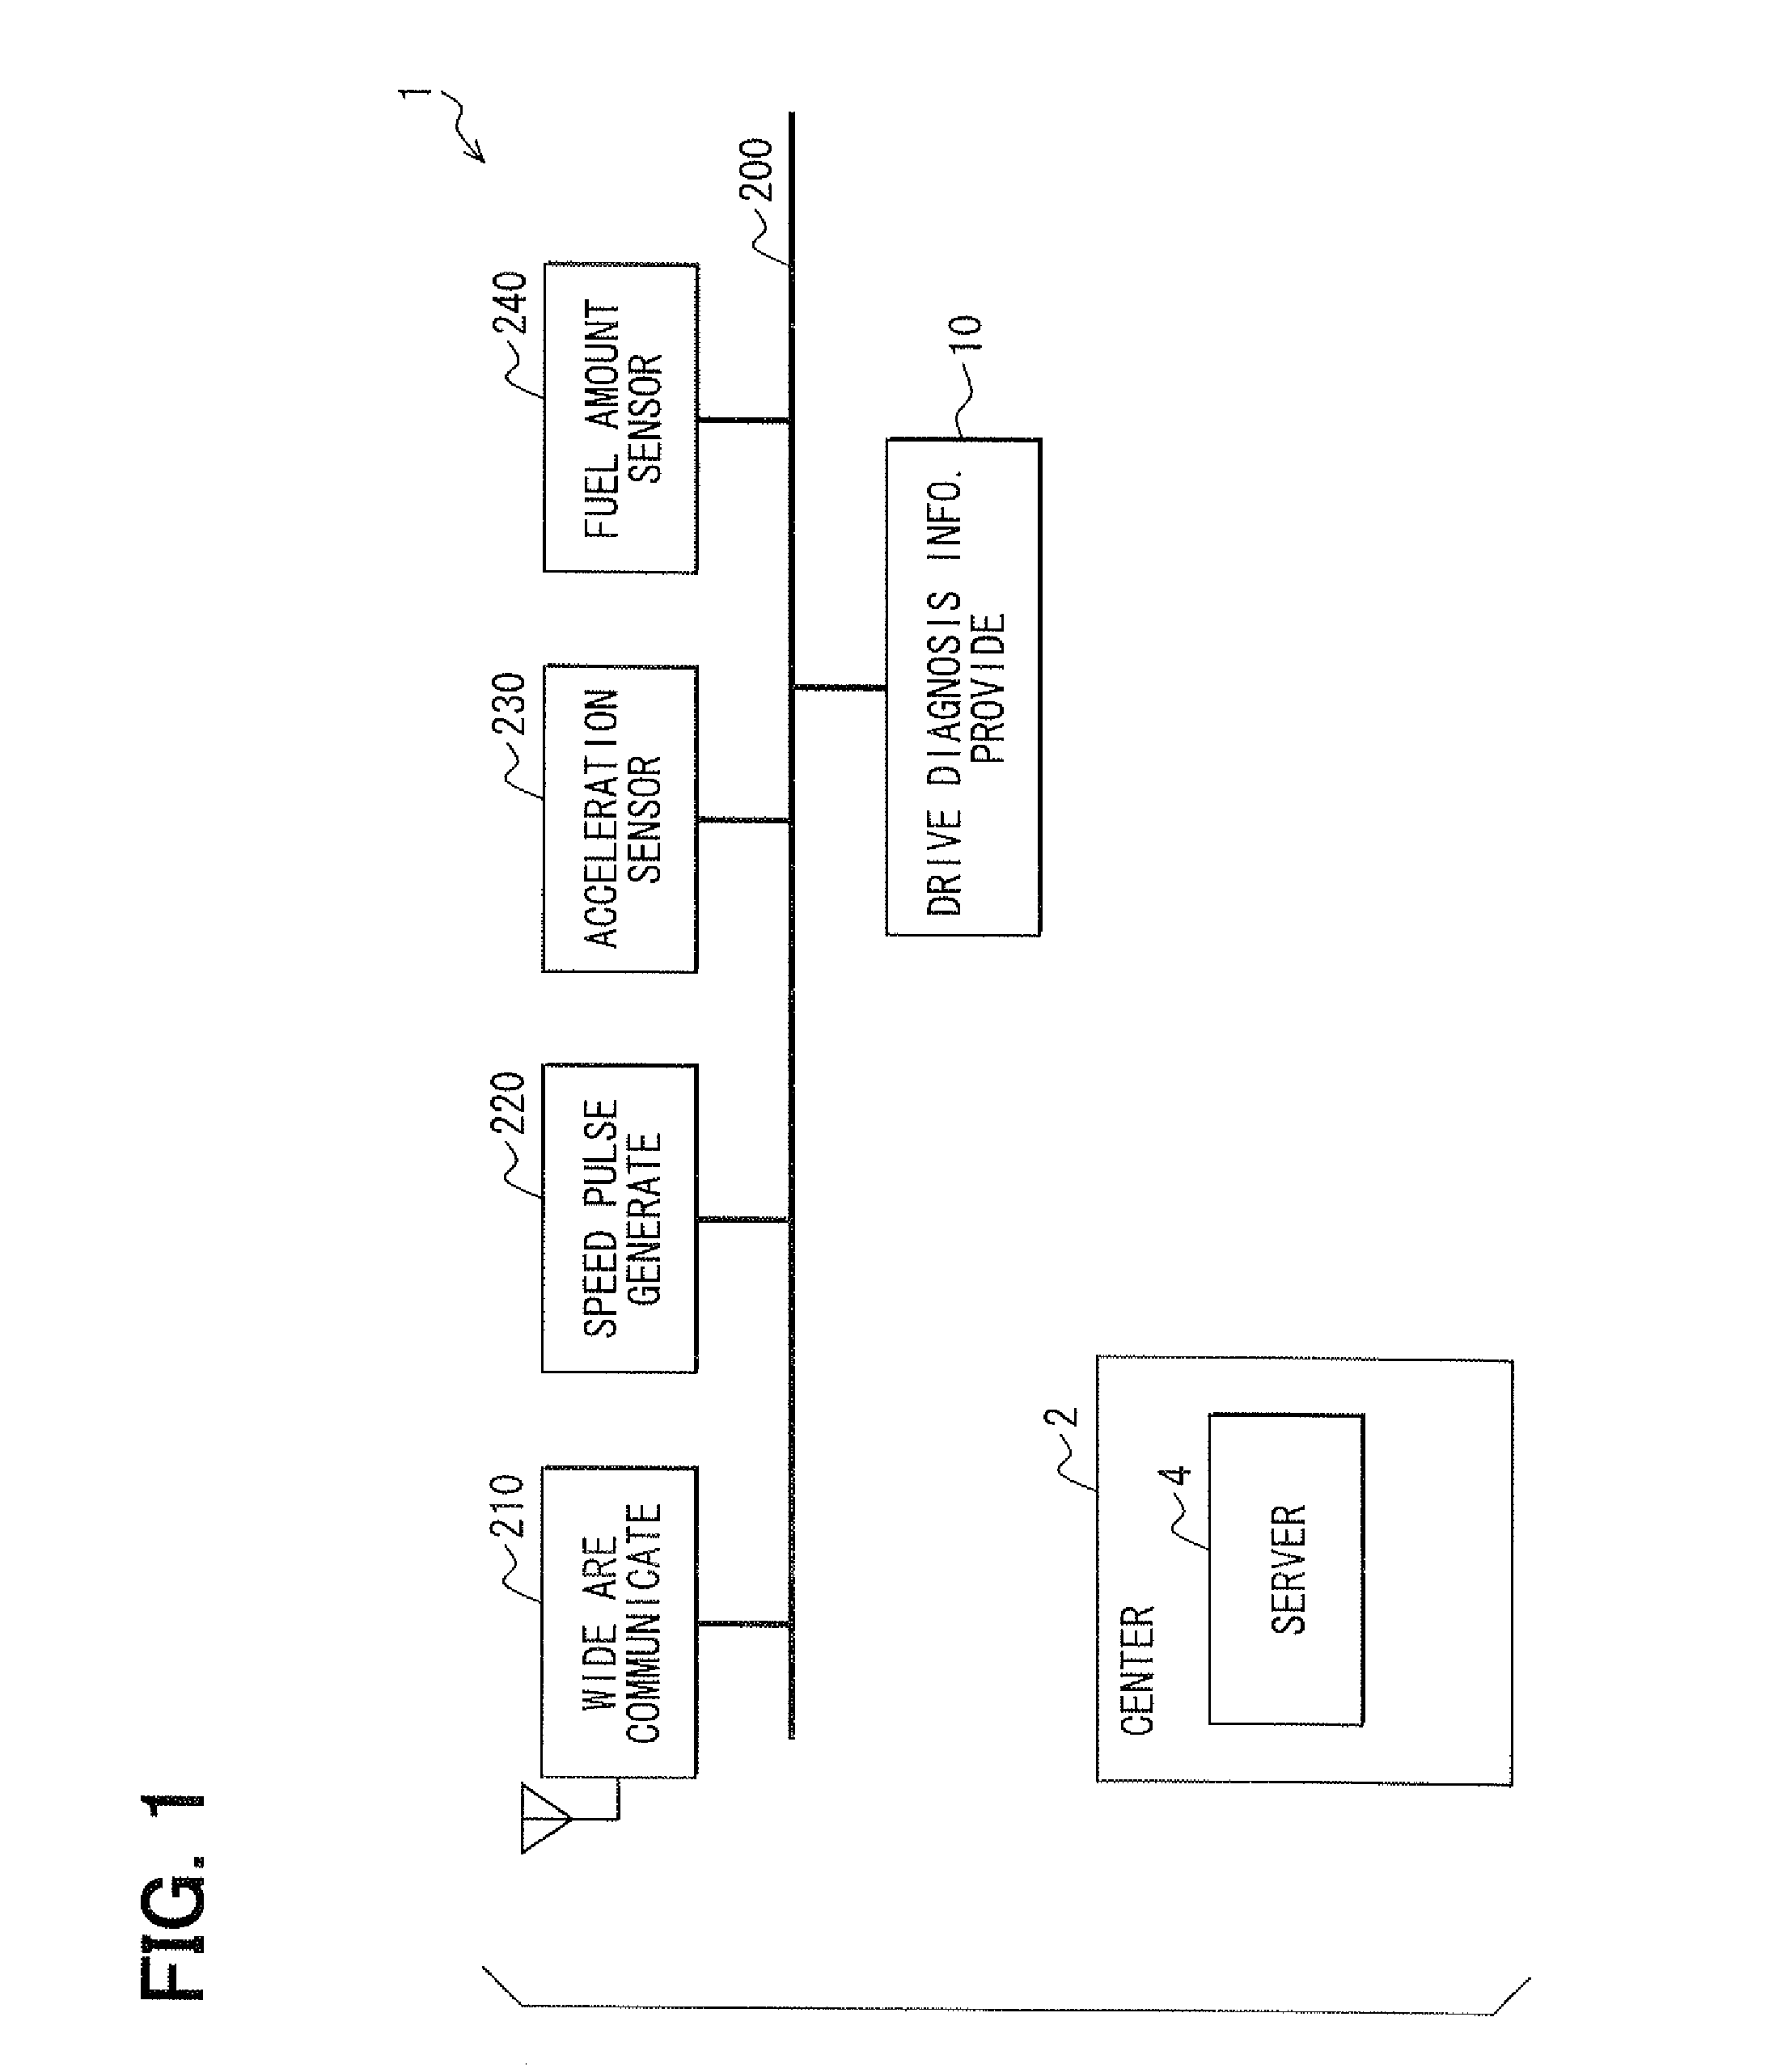 Driving diagnosis information providing apparatus and system